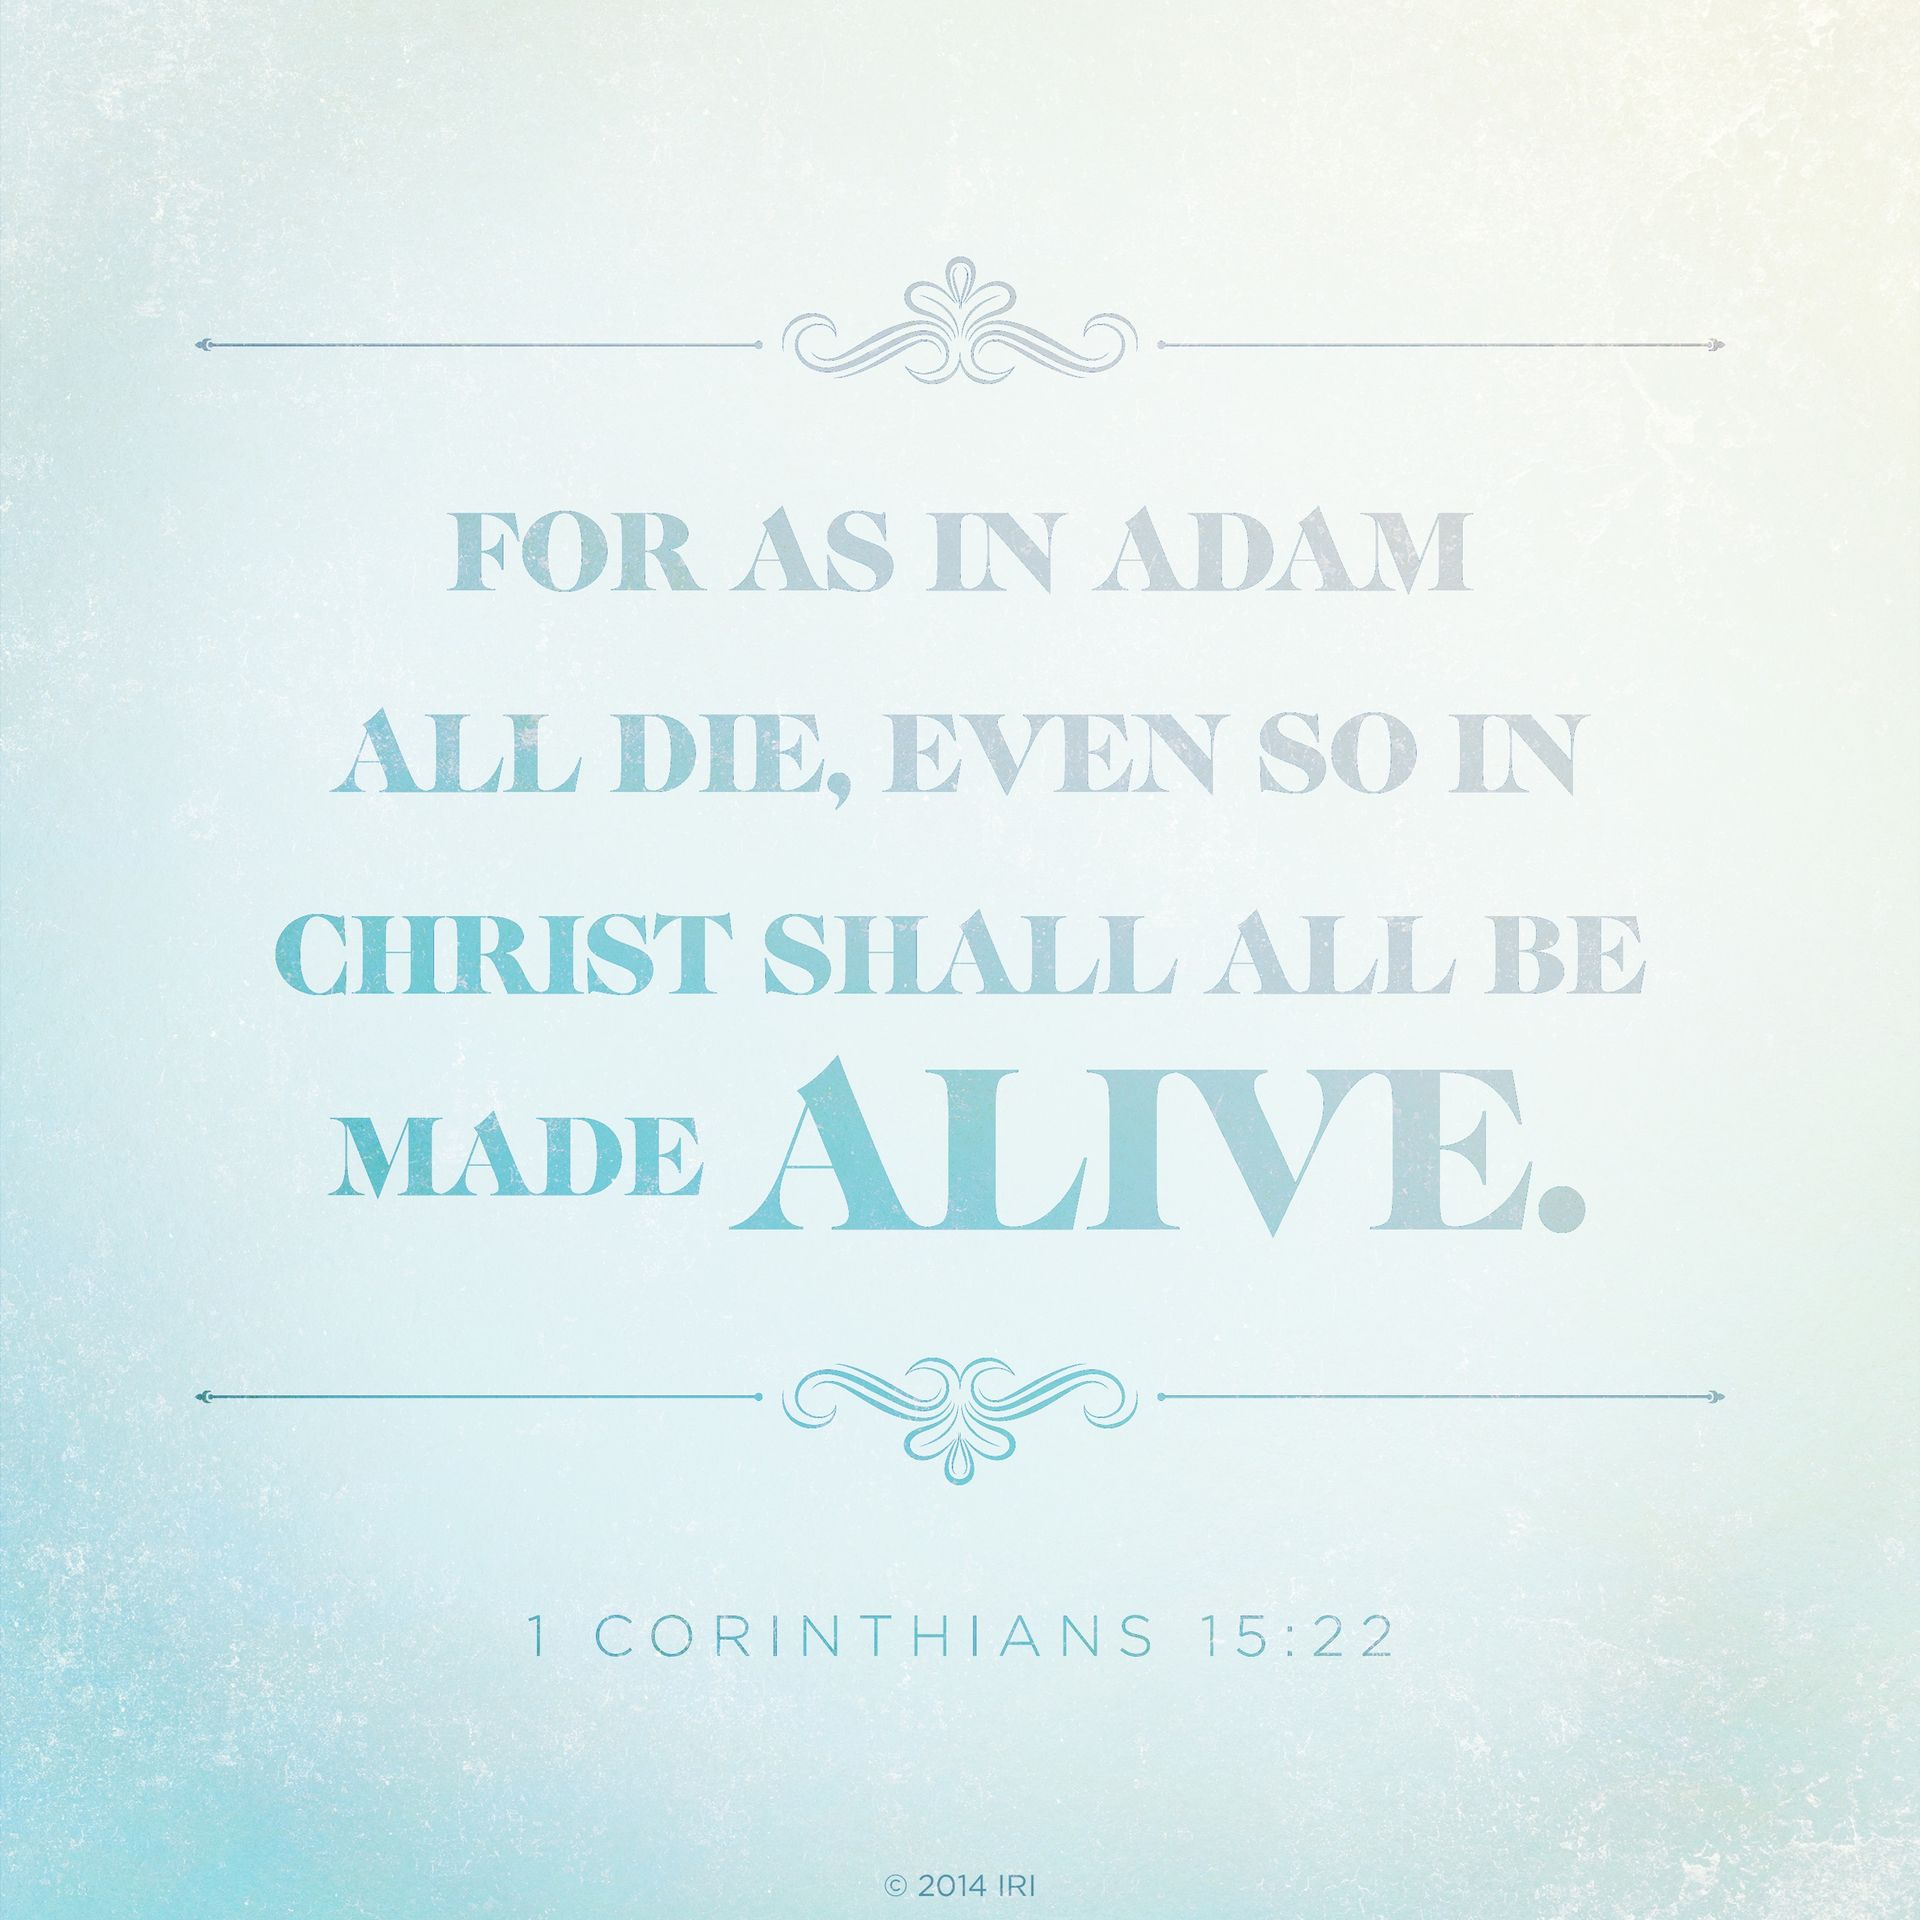 “For as in Adam all die, even so in Christ shall all be made alive.”—1 Corinthians 15:22